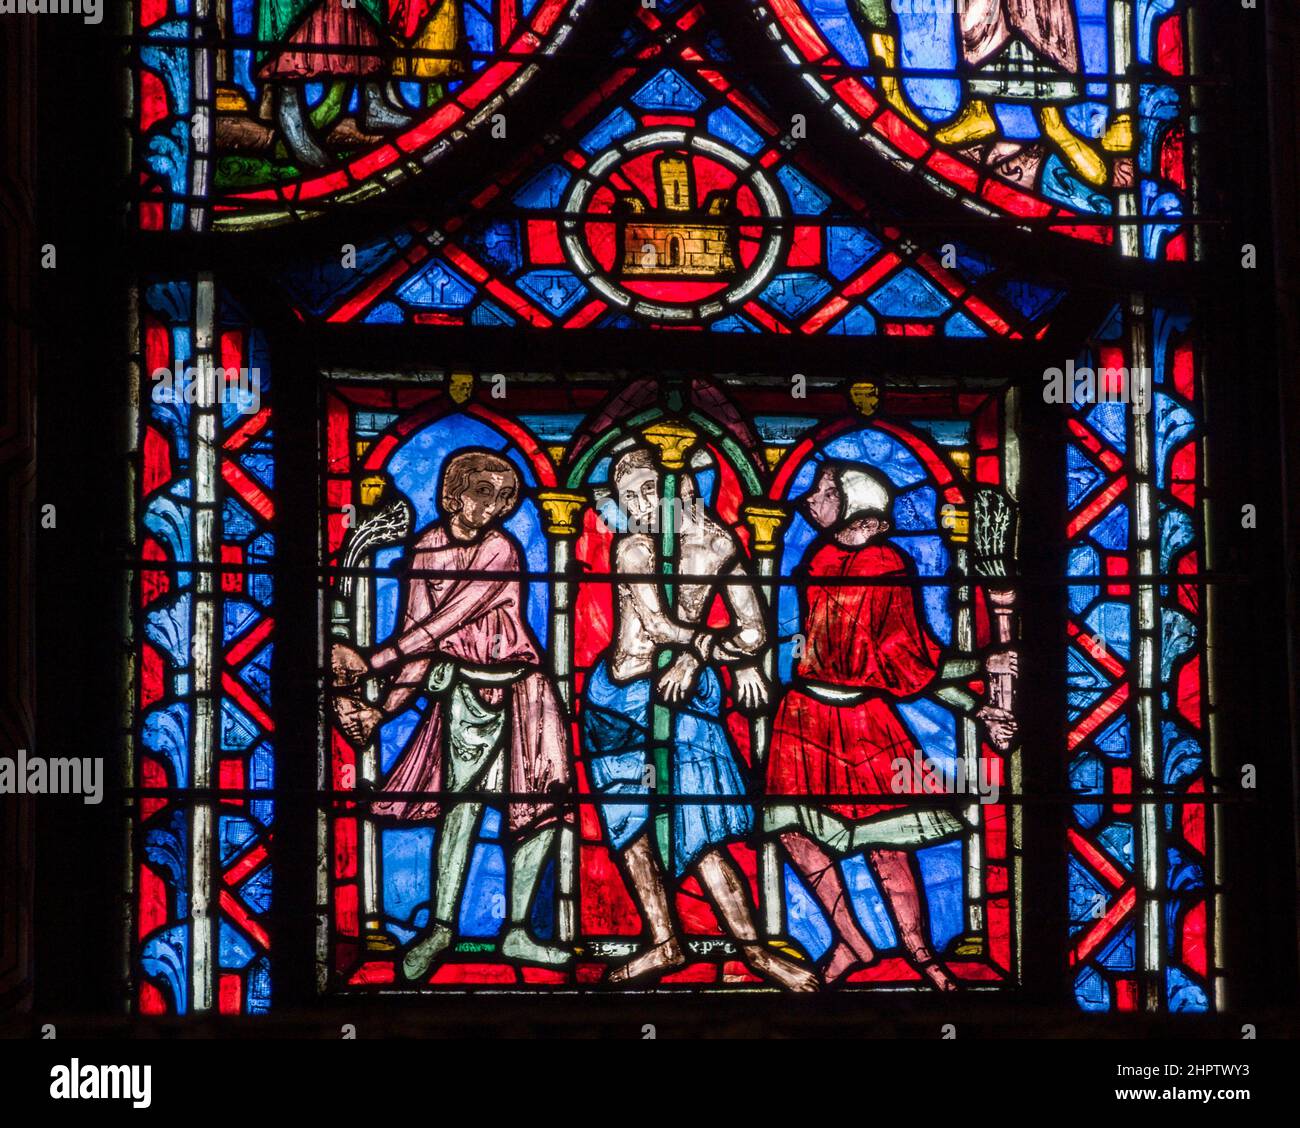 Punishment in Stained Glass: Detail fom an ancient stained glass window in Sainte Chapelle. A shackled man is whipped by two others while tied to a pillar. A castle hangs above. Stock Photo